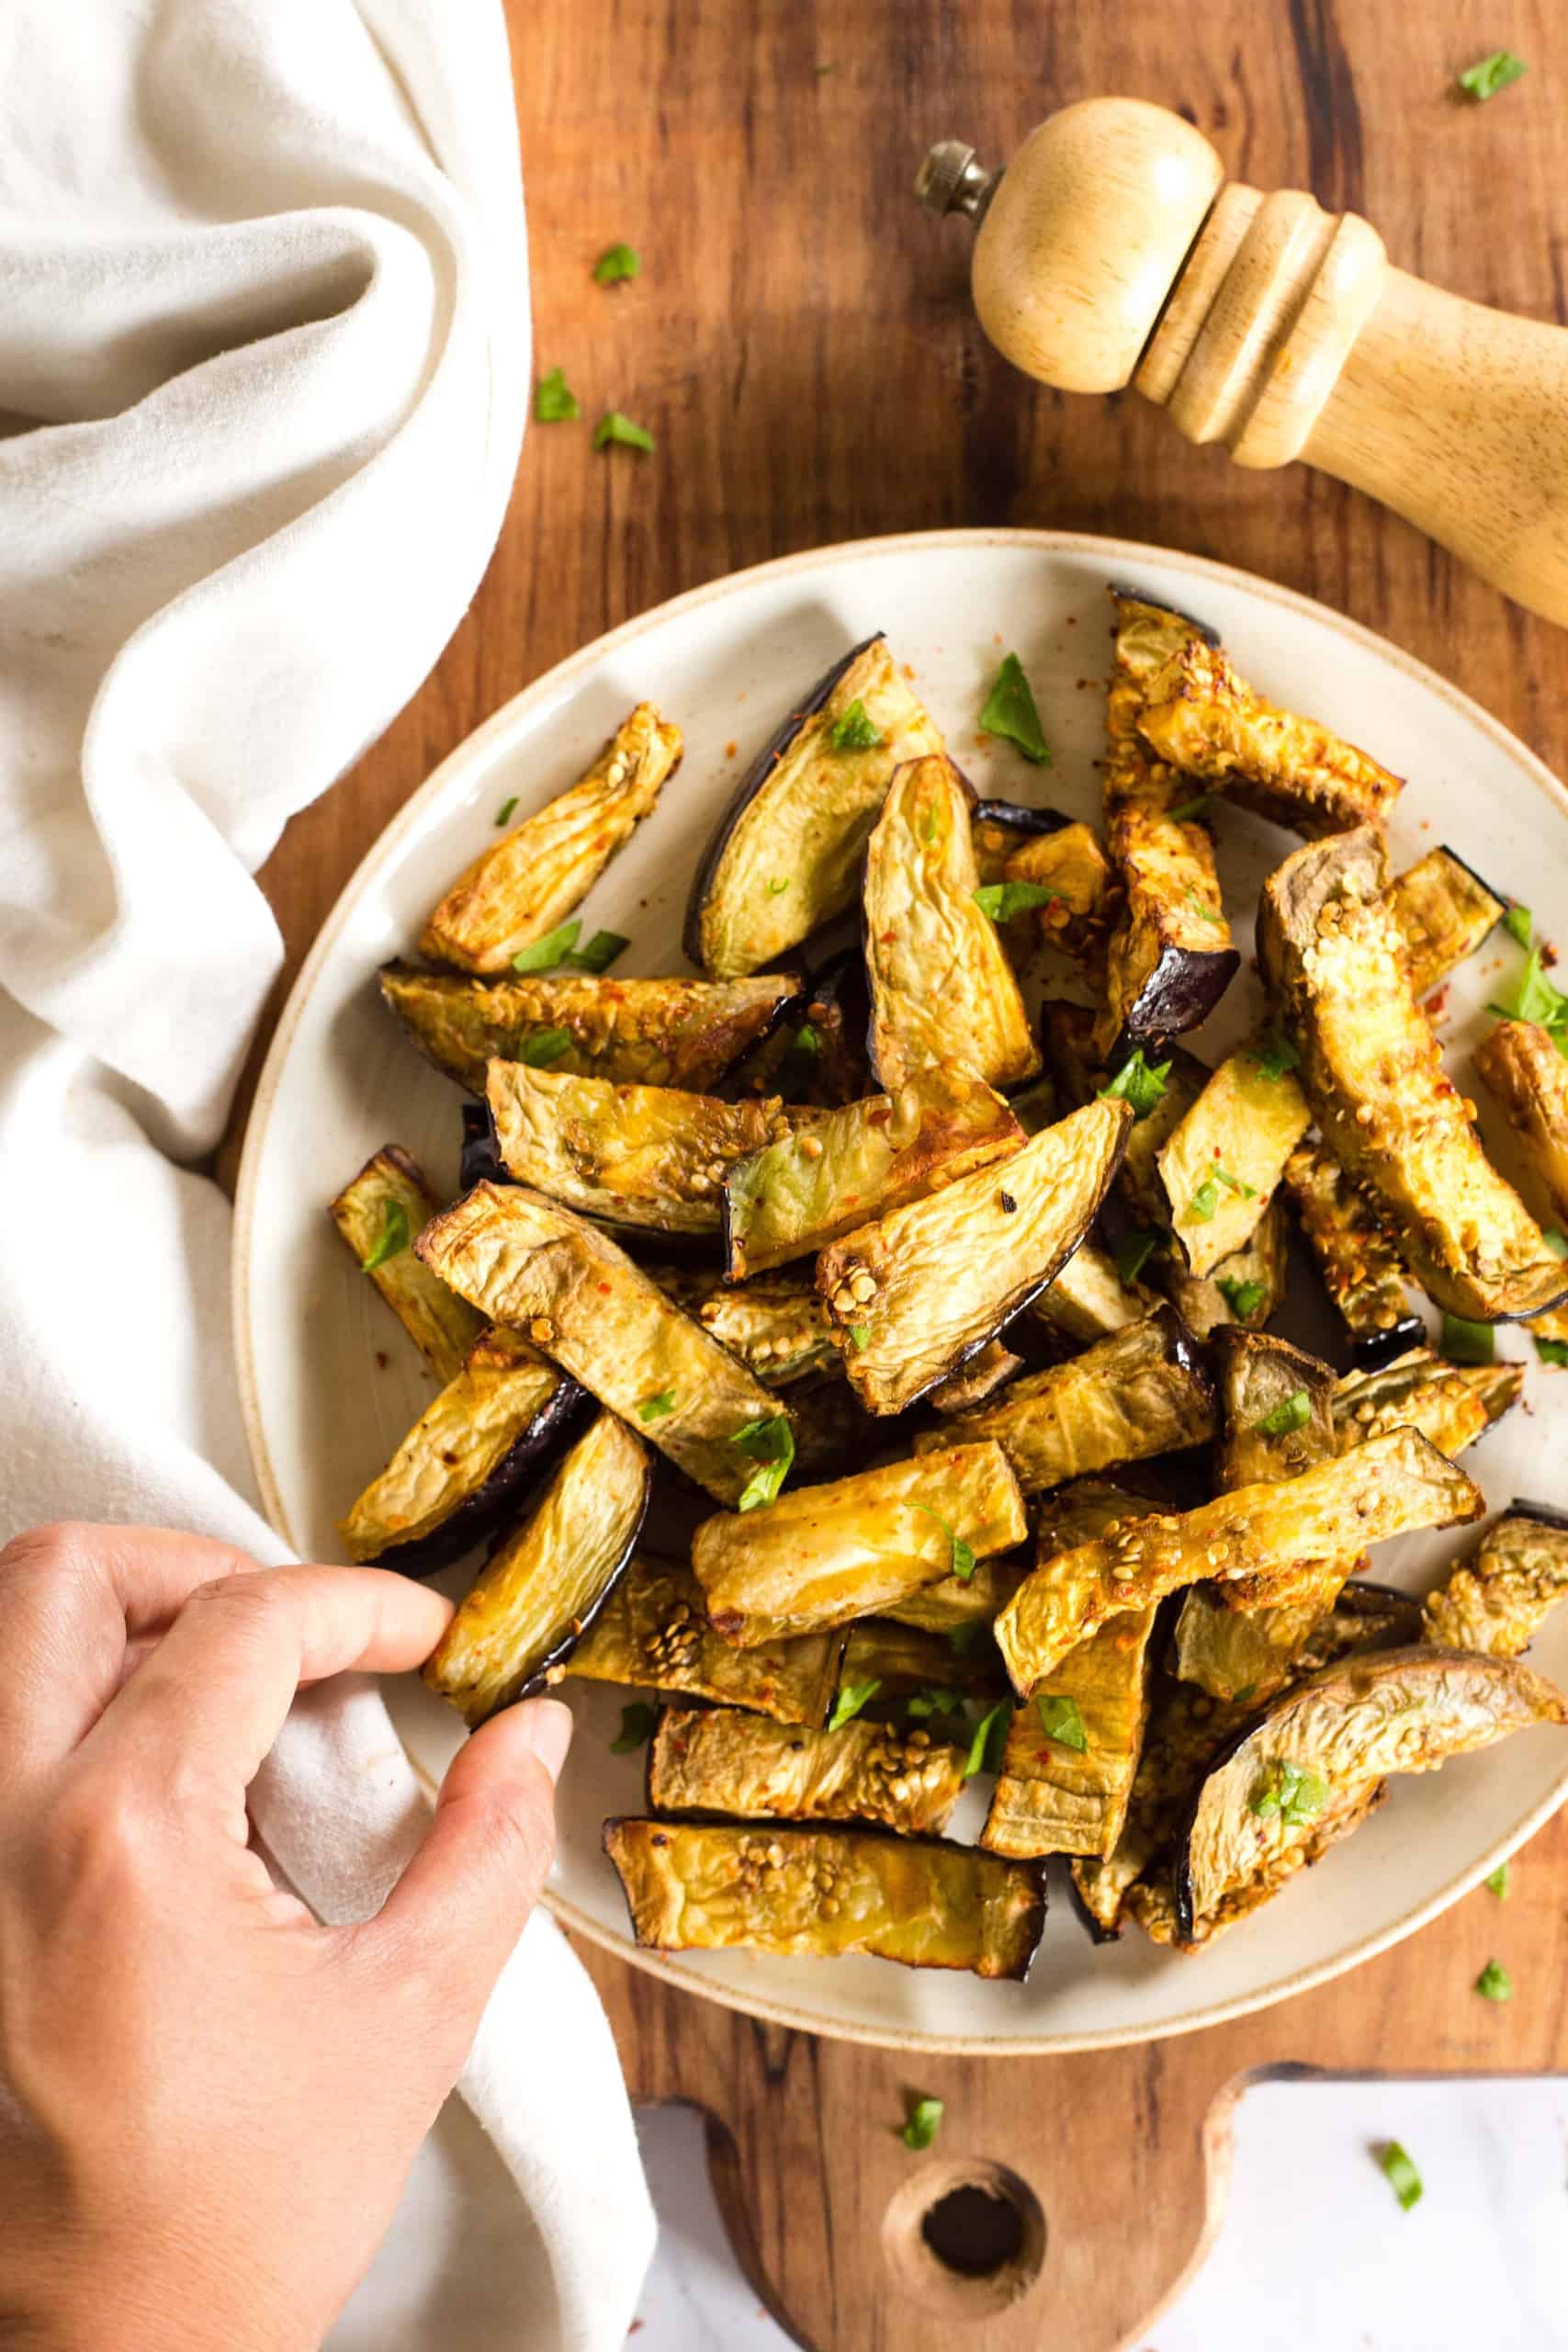 Hand reaching for air fryer eggplant fries from a plate on a wooden board.